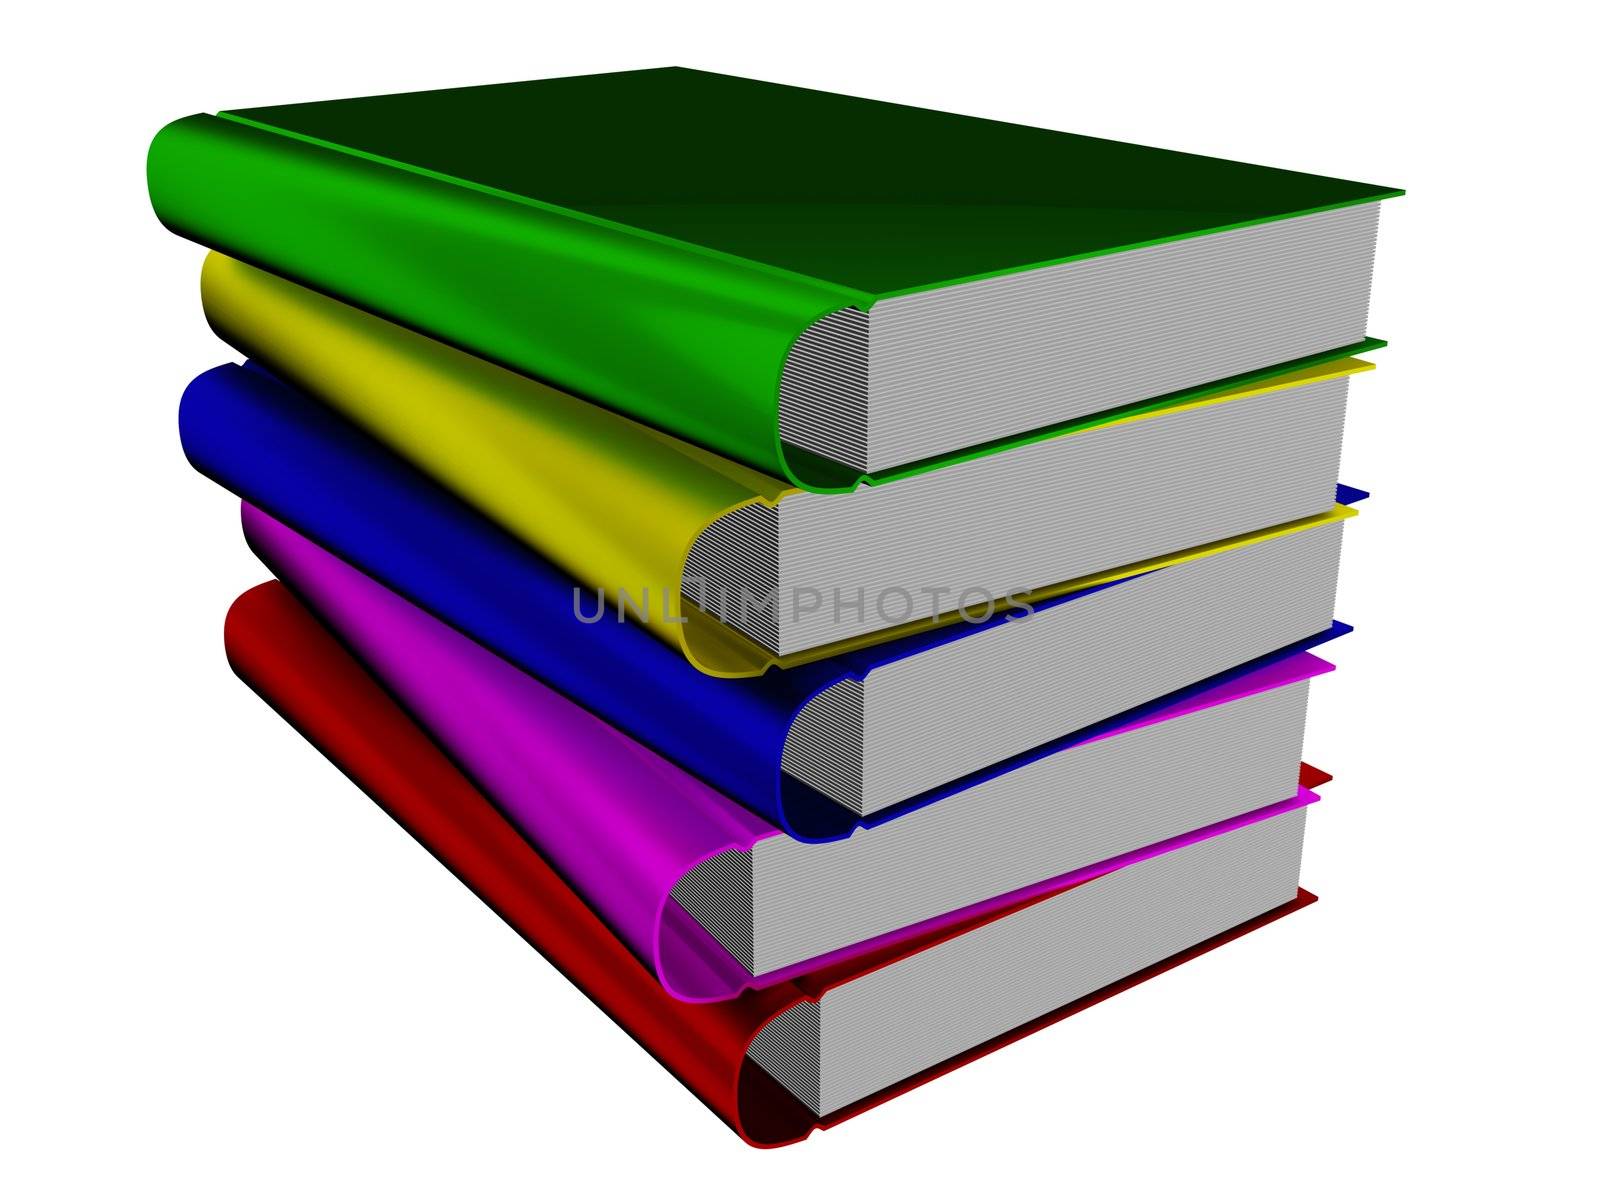 Pile of books. 3D the isolated image.